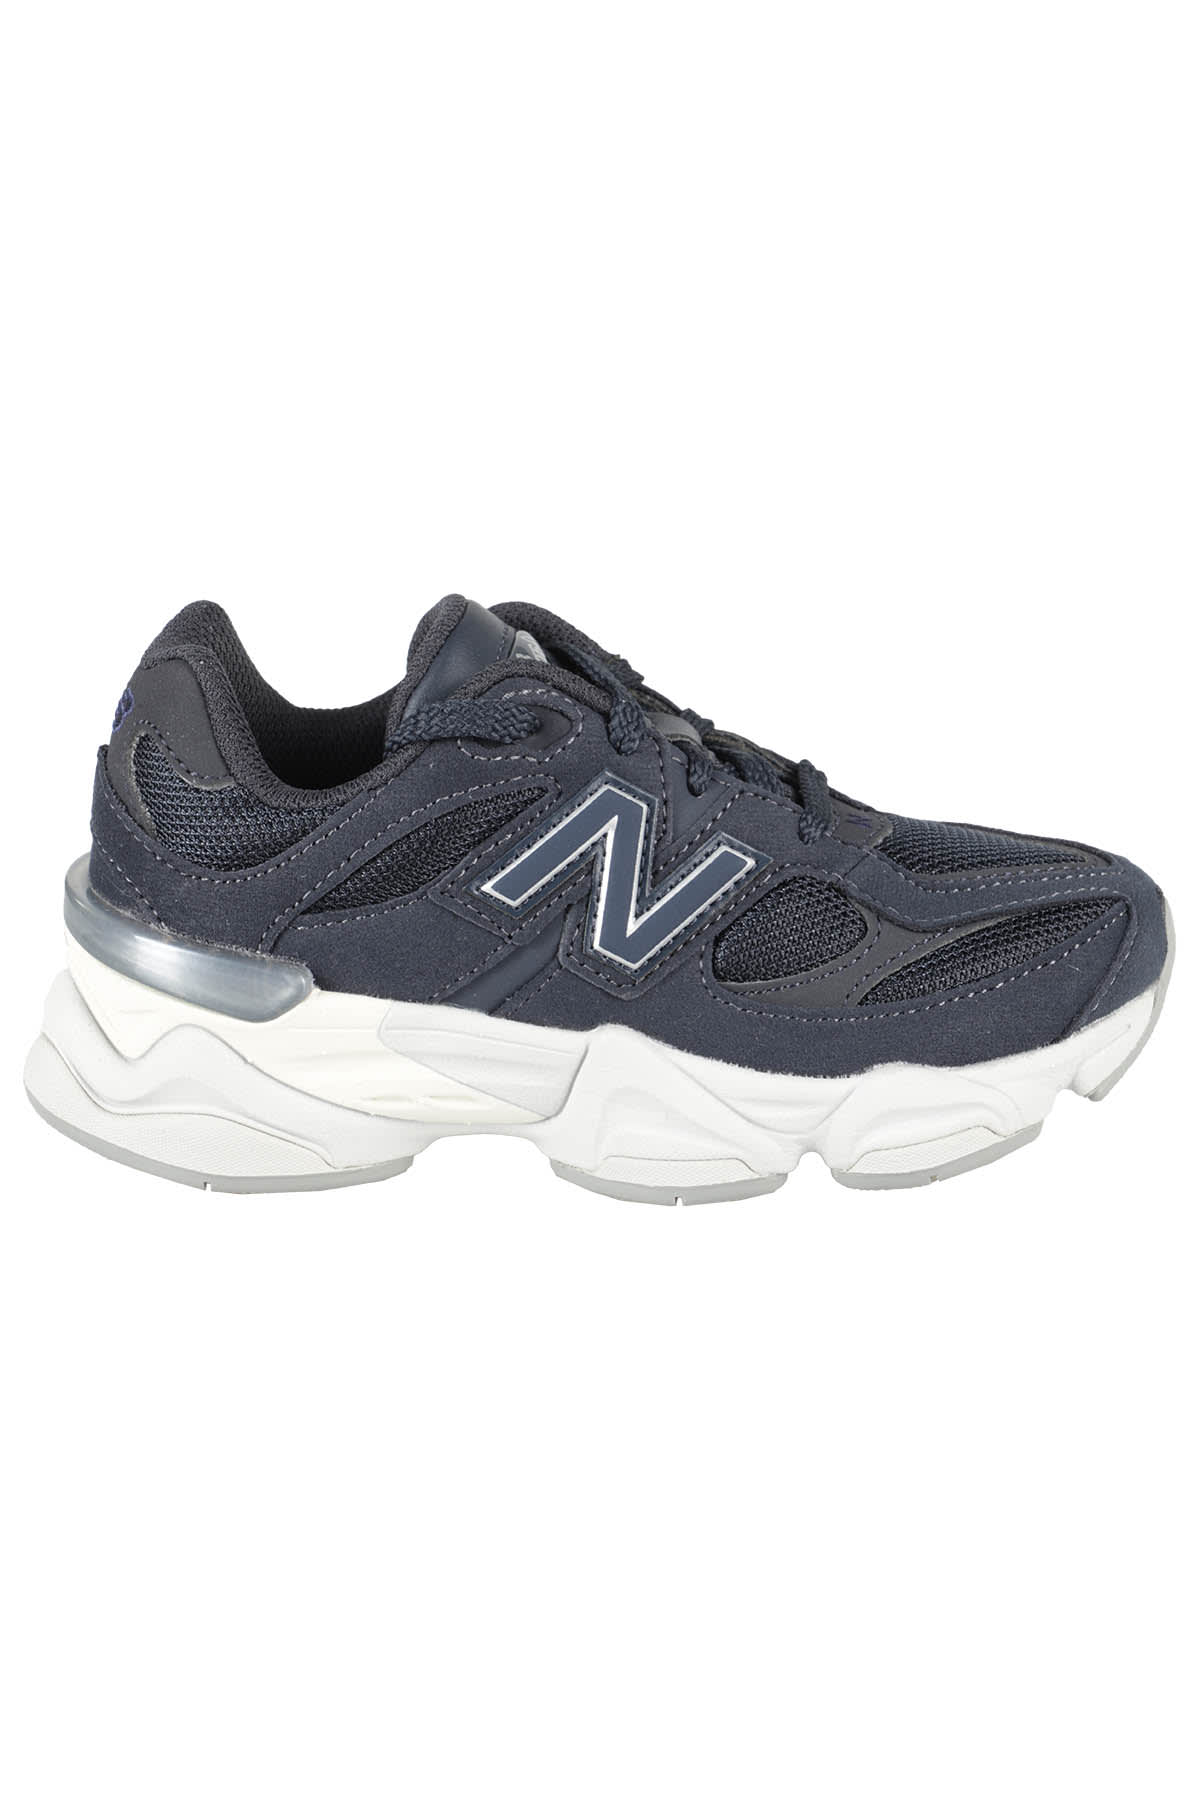 New Balance Kids' Lifestyle In Eclipse